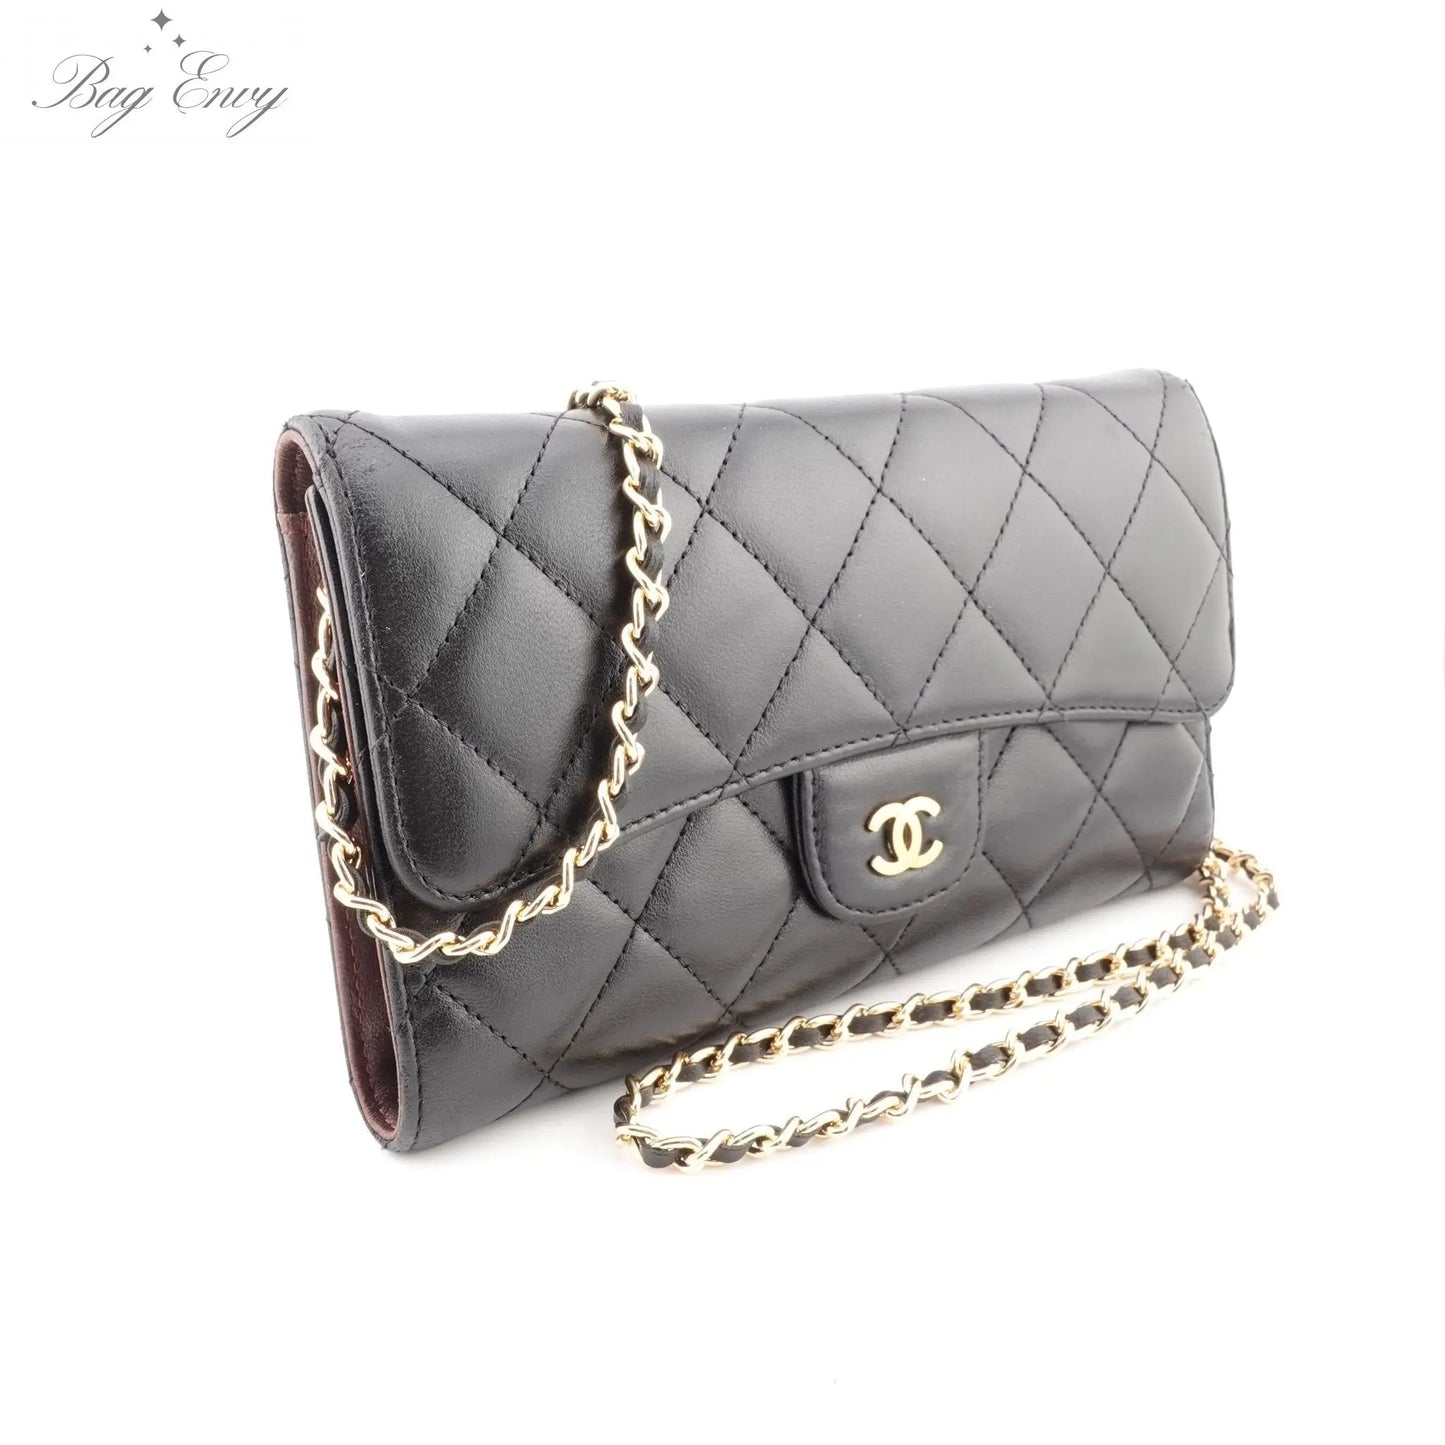 CHANEL Lambskin Classic Flap Wallet with Chain - Bag Envy